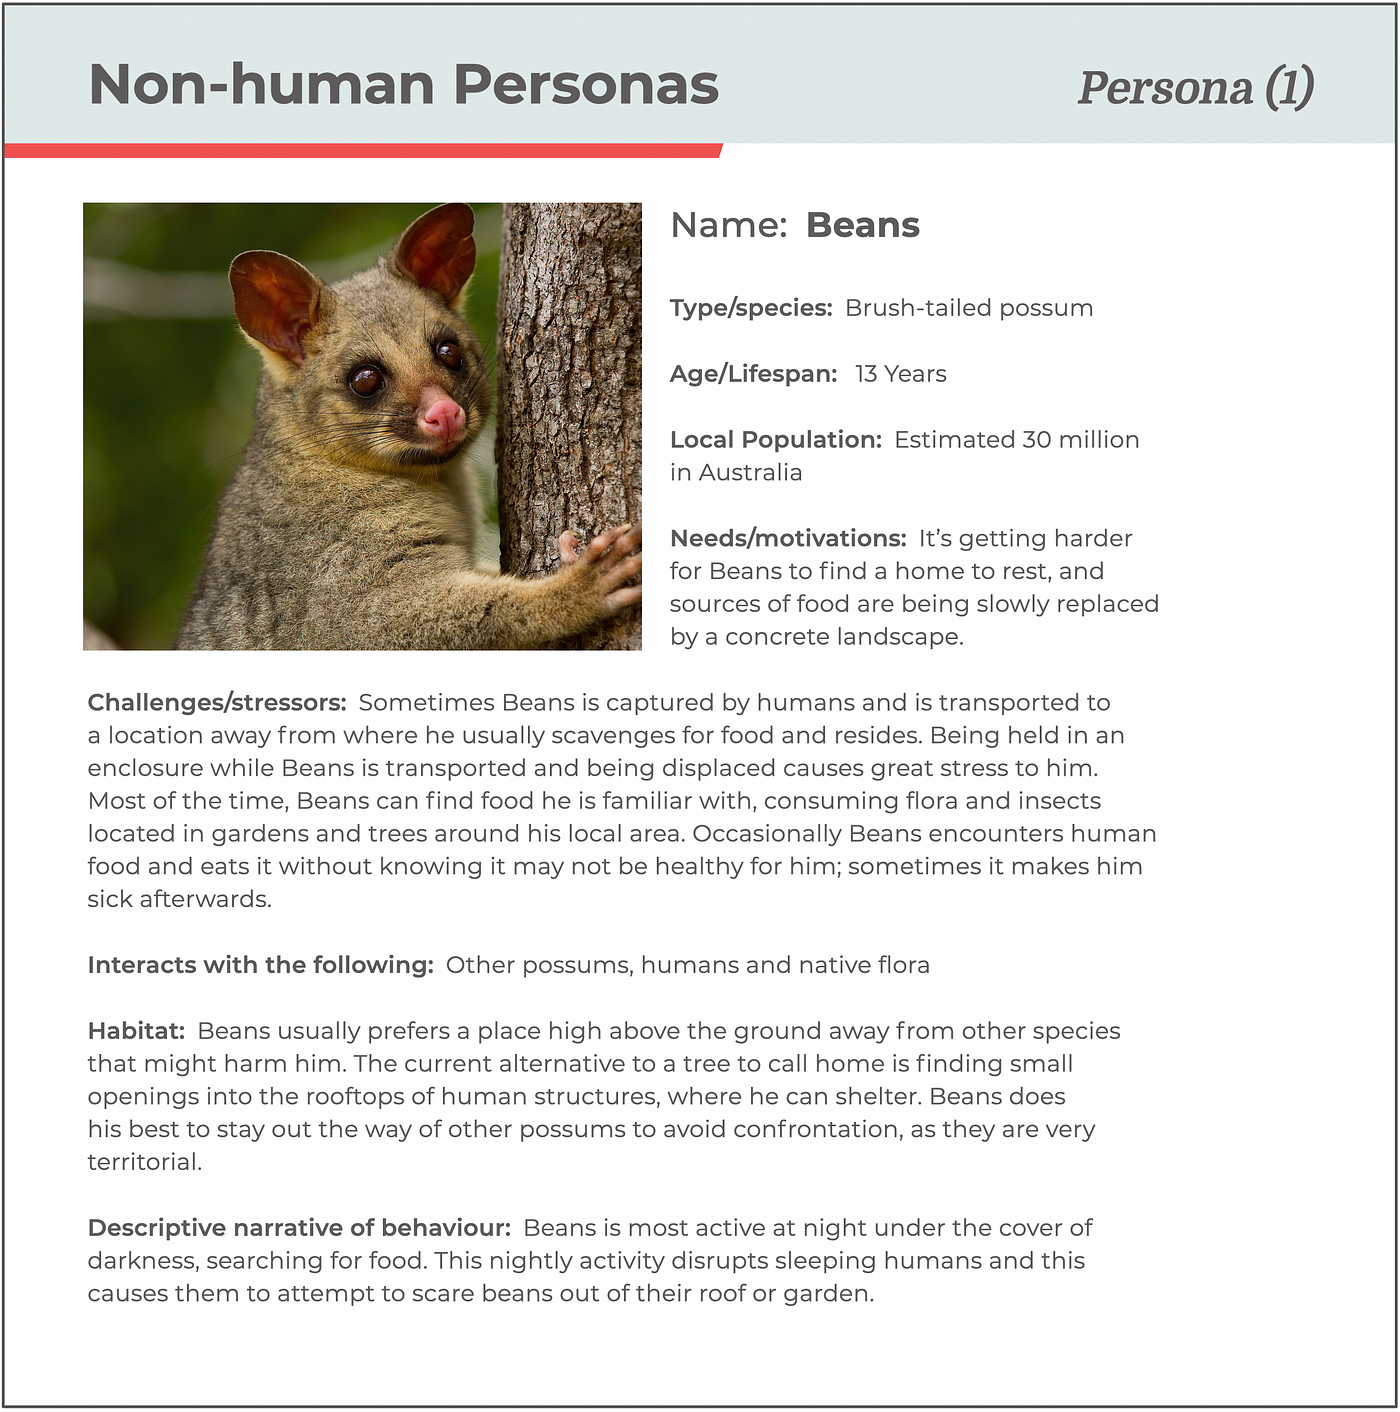 A filled-in example of a non-human persona created for Beans the possum, showing a photo of the possum and text entries for type/species, needs/motivations, challenges/stressors, interacts with the following, habitat, and a description of their behaviour.